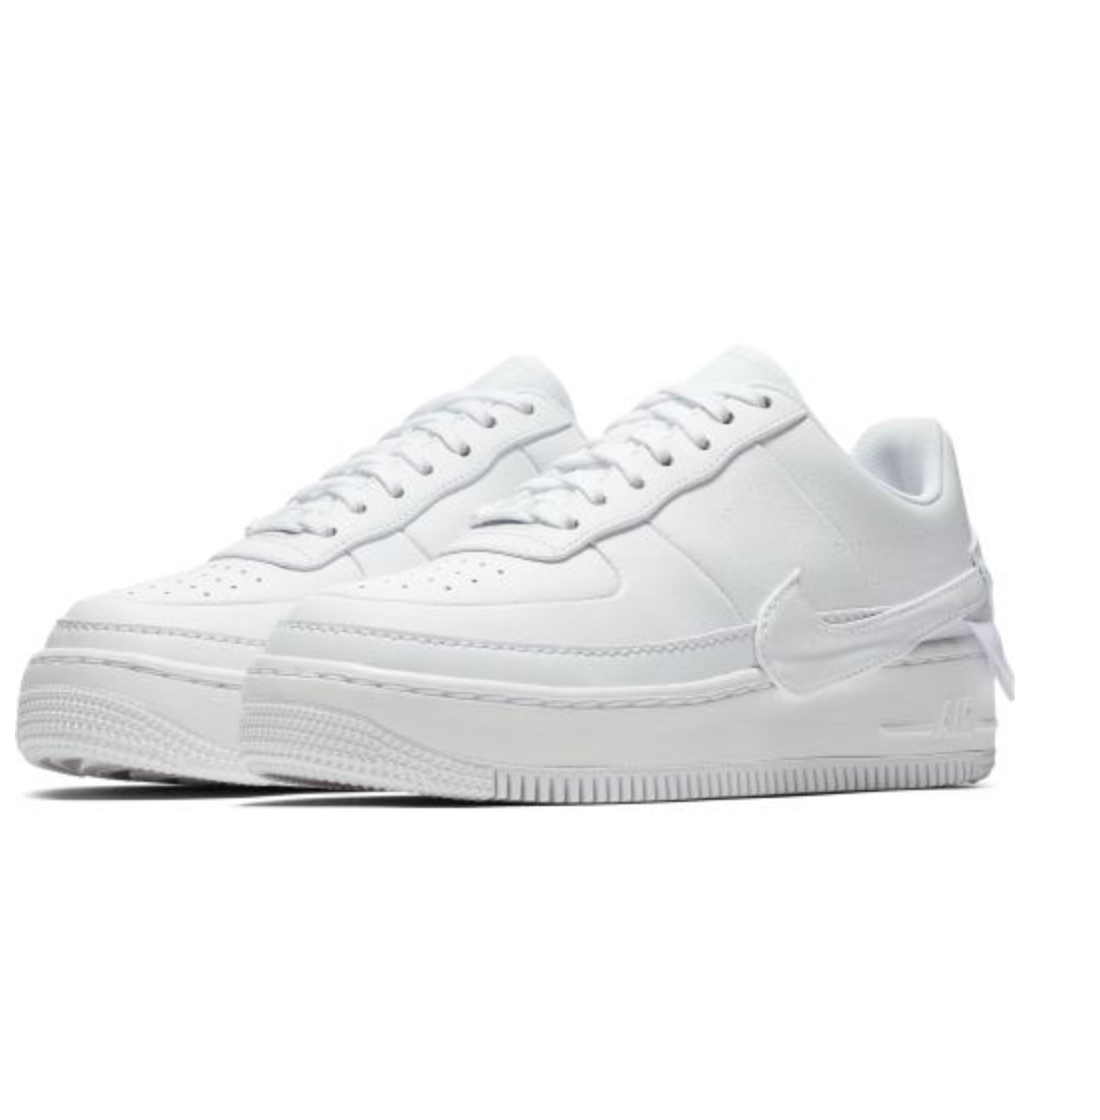 size 39 nike air force 1